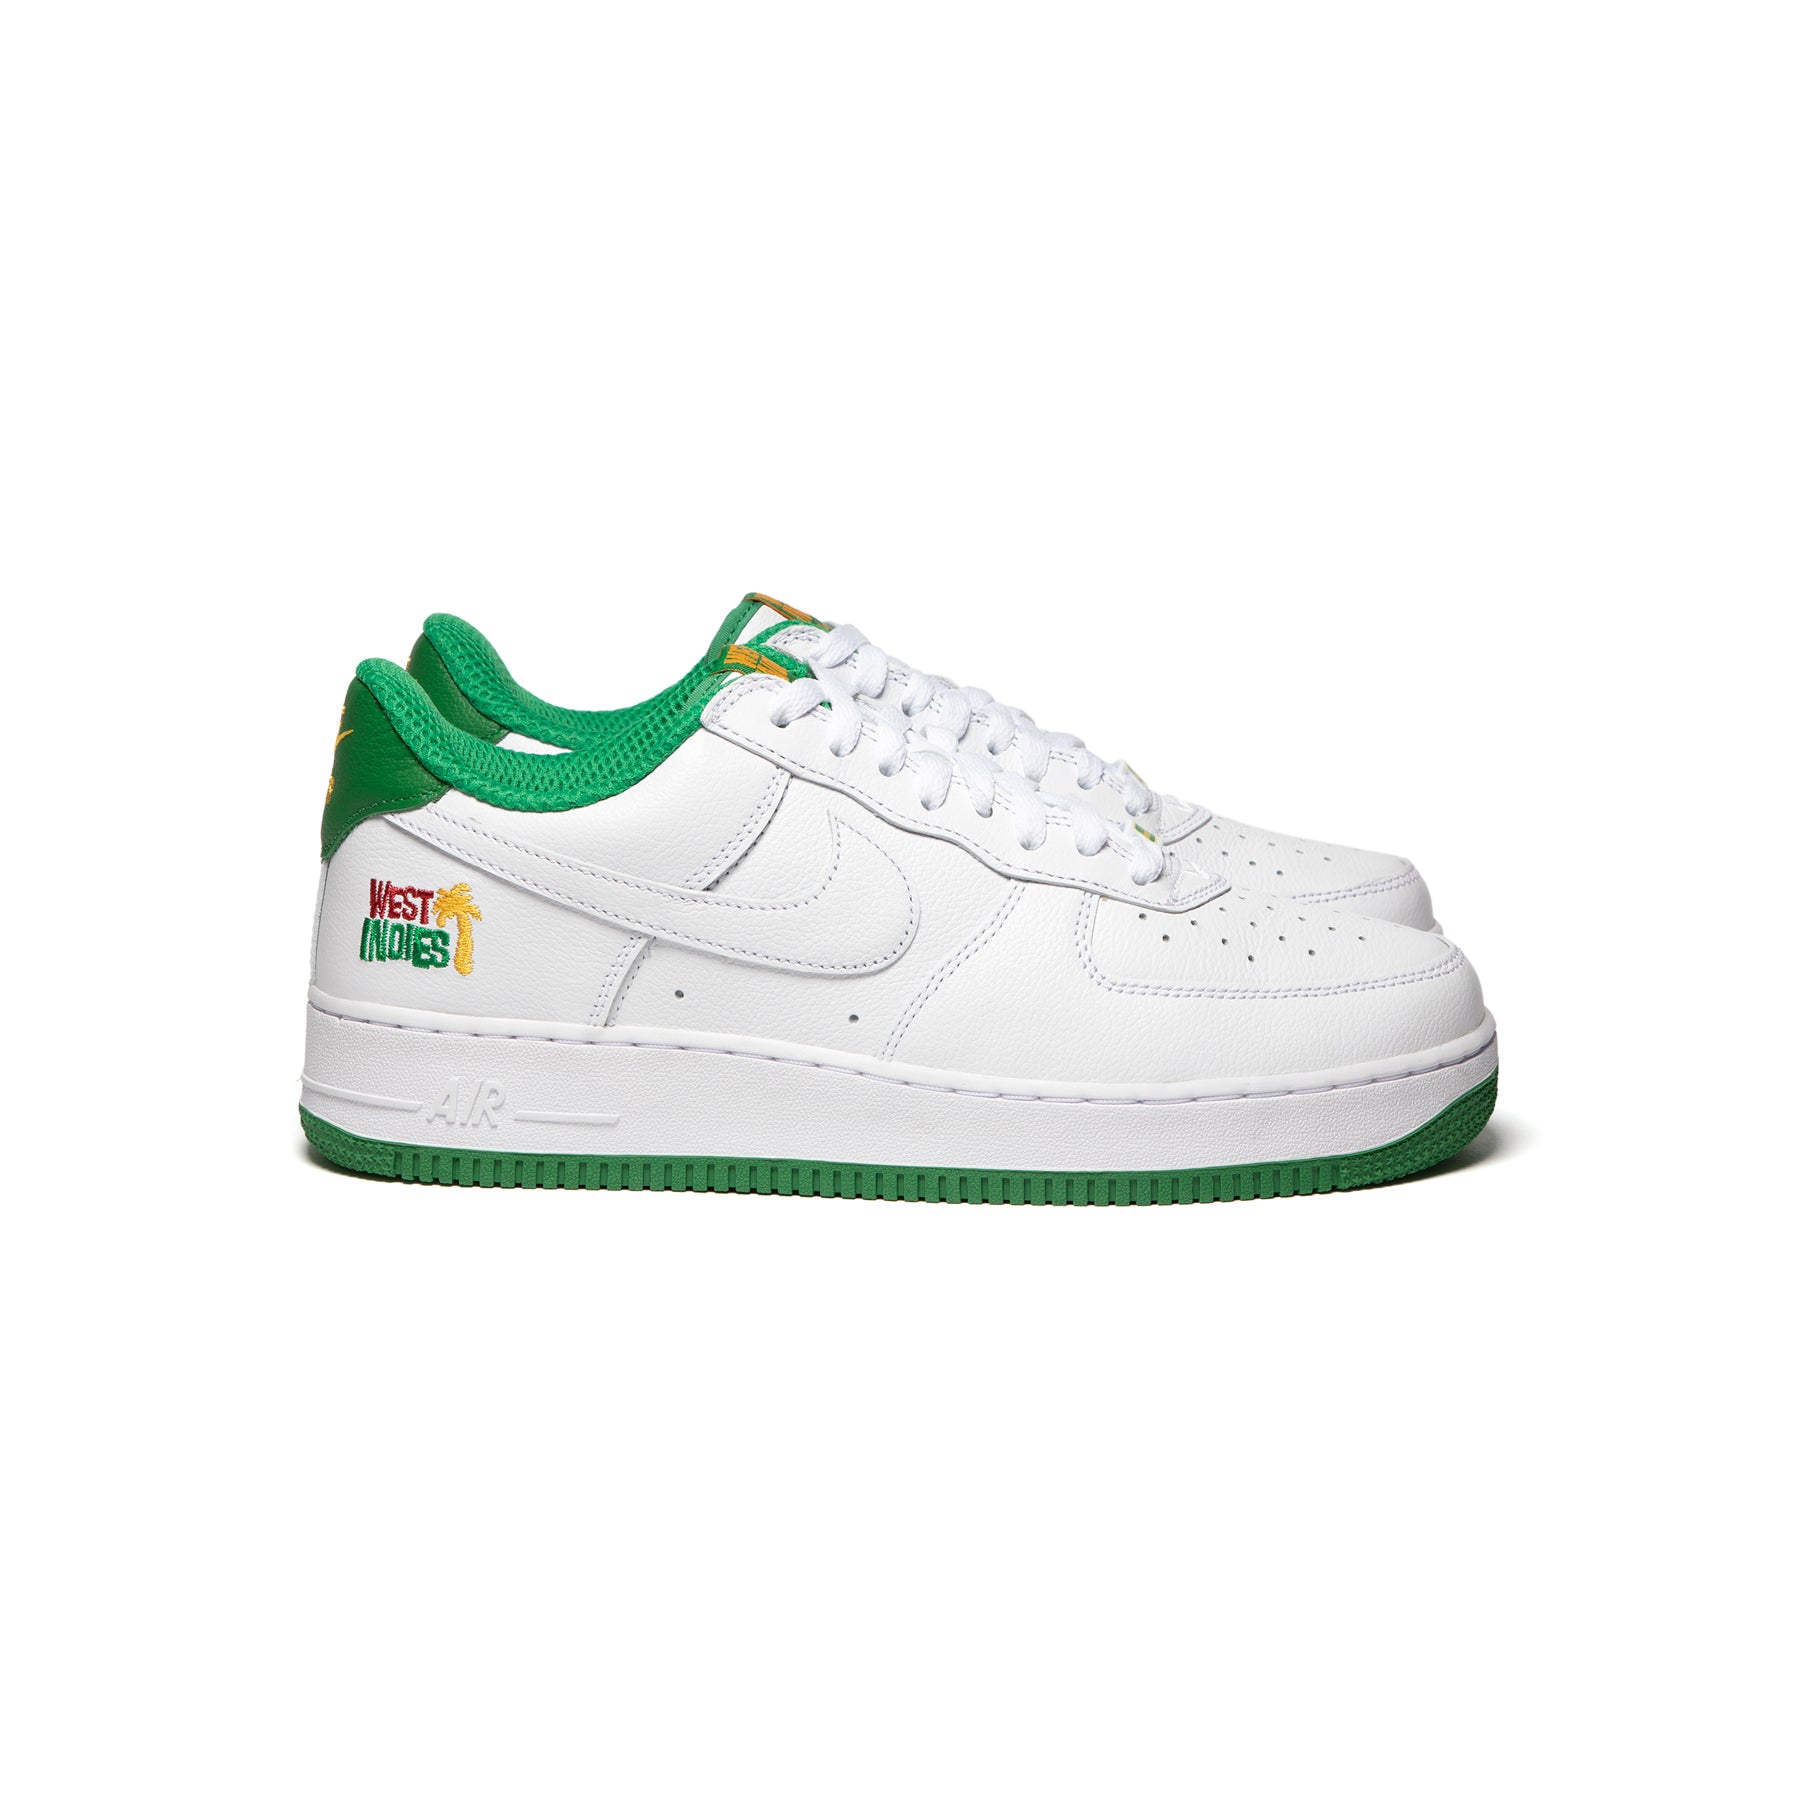 Nike Air 1 Low Retro (White/Classic Green) Concepts